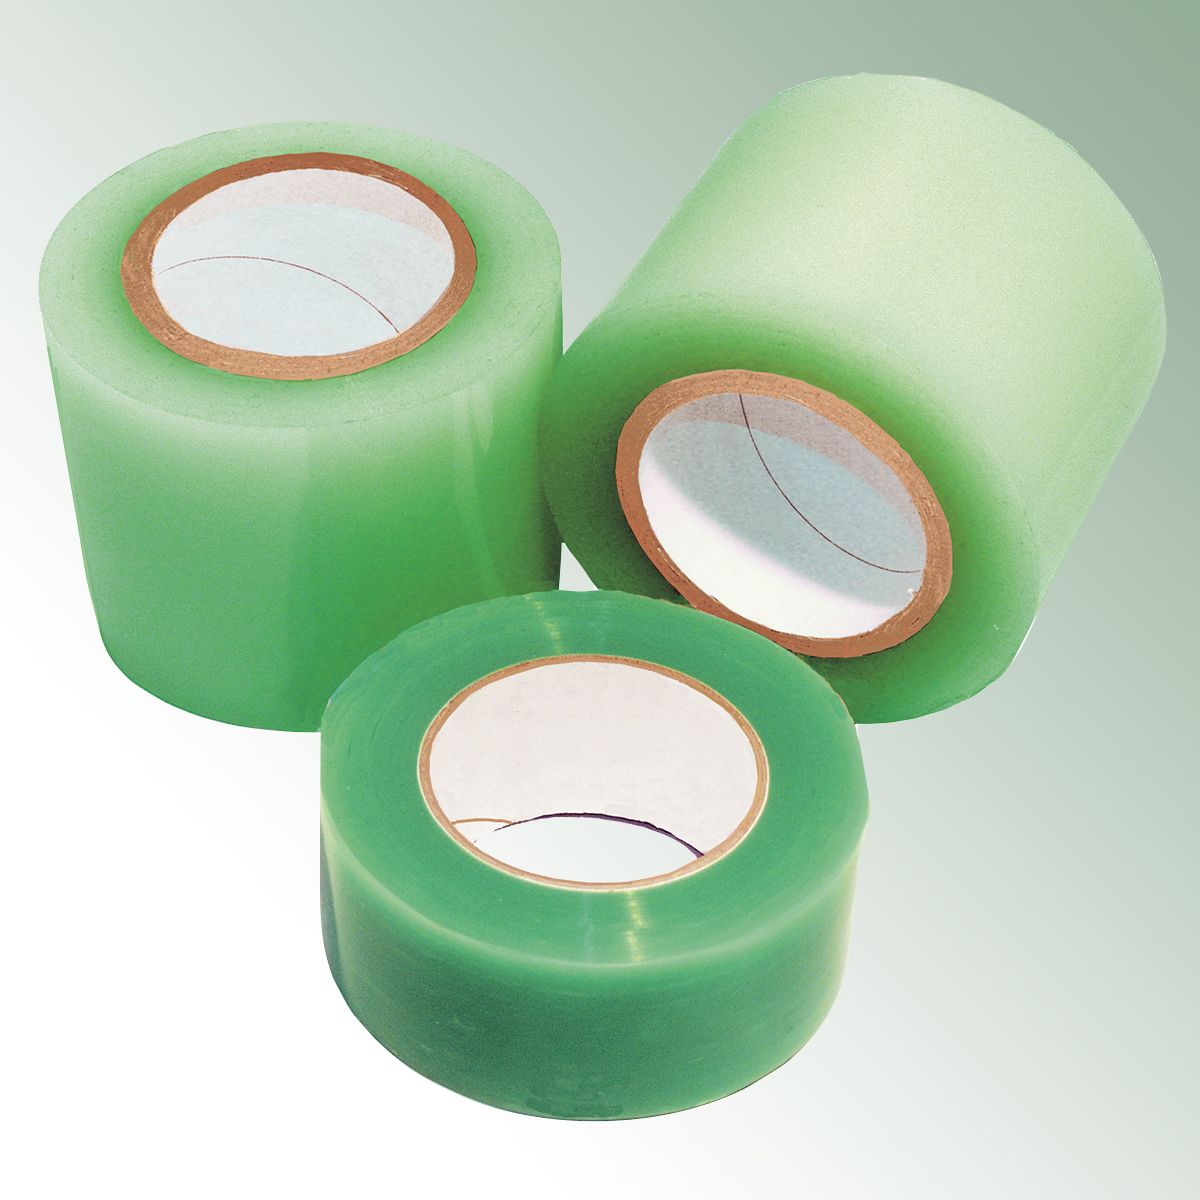 Special adhesive tape width 50 mm, length 25 m